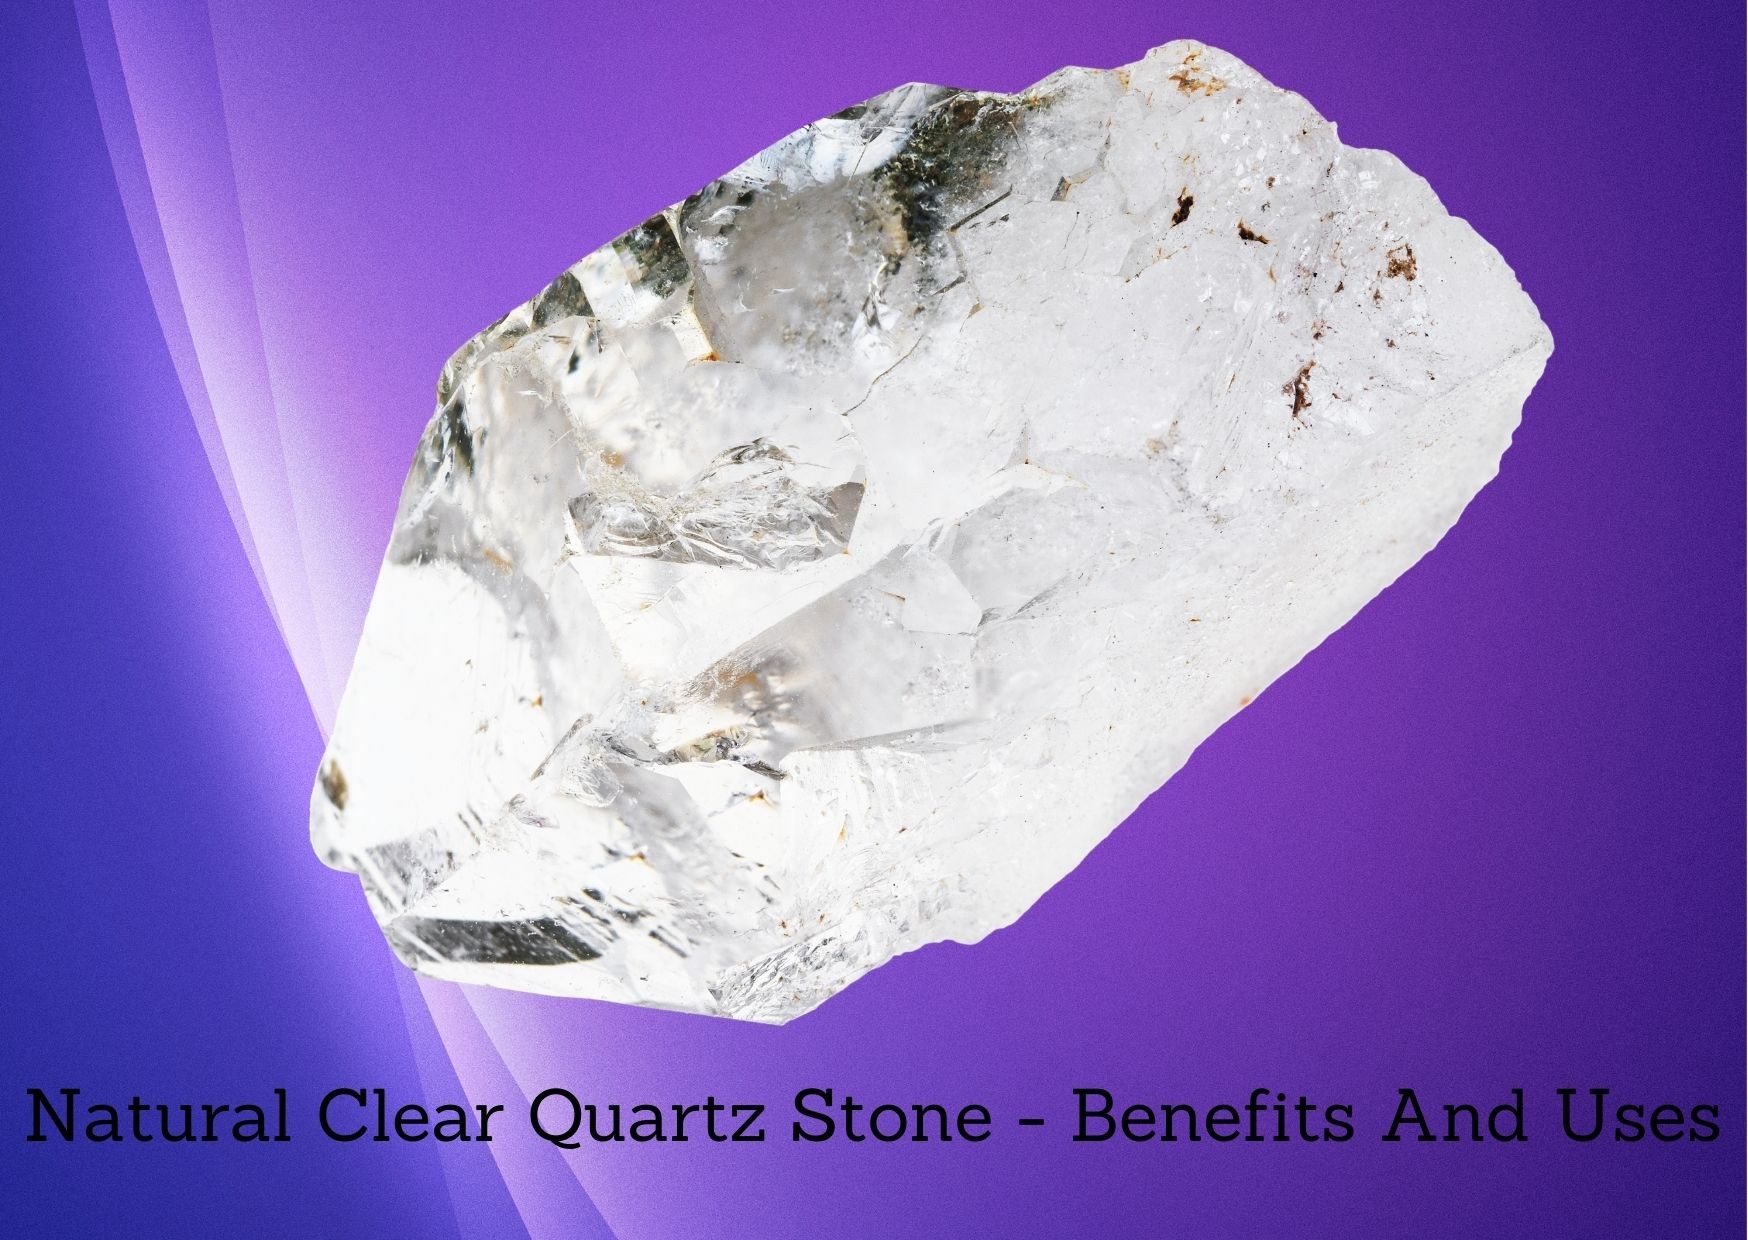 Benefits And Uses Of Natural Clear Quartz Stone